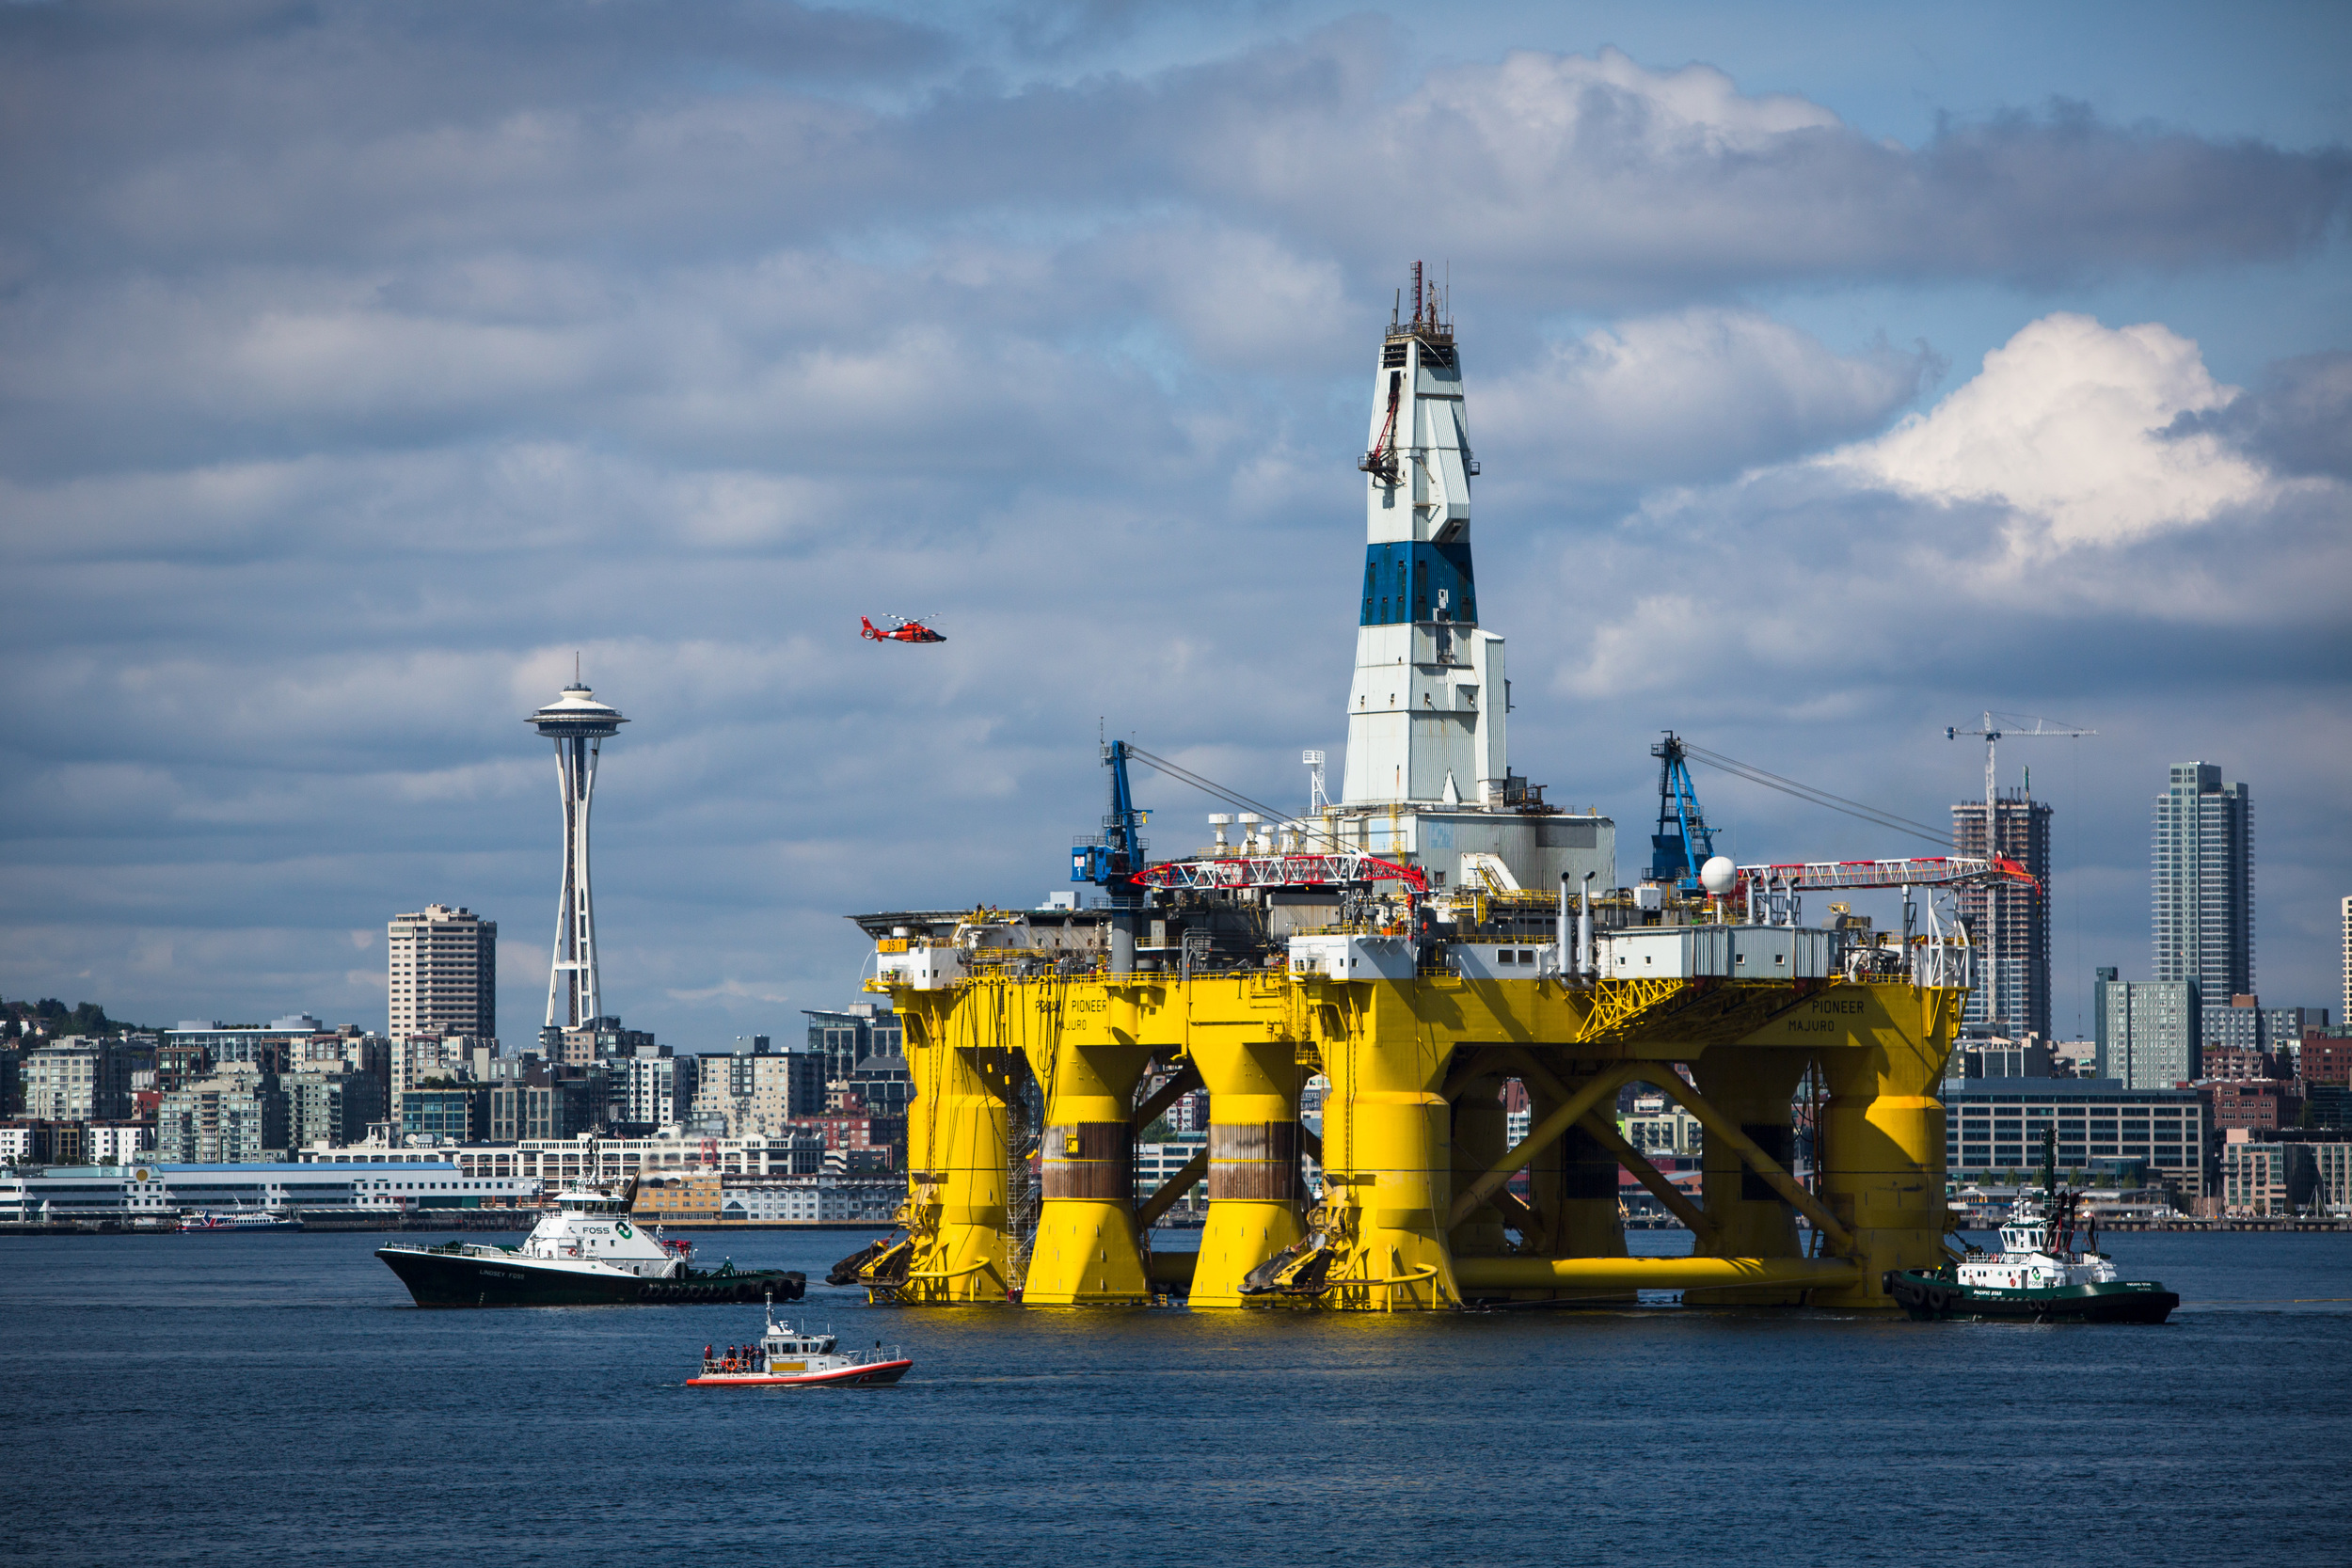   The Polar Pioneer arrives in Seattle minutes before kayaktivists took to the water to protest the potentially dangerous environmental impacts of arctic drilling.&nbsp;The protest flotilla drew many paddlers to show their displeasure with the rig be